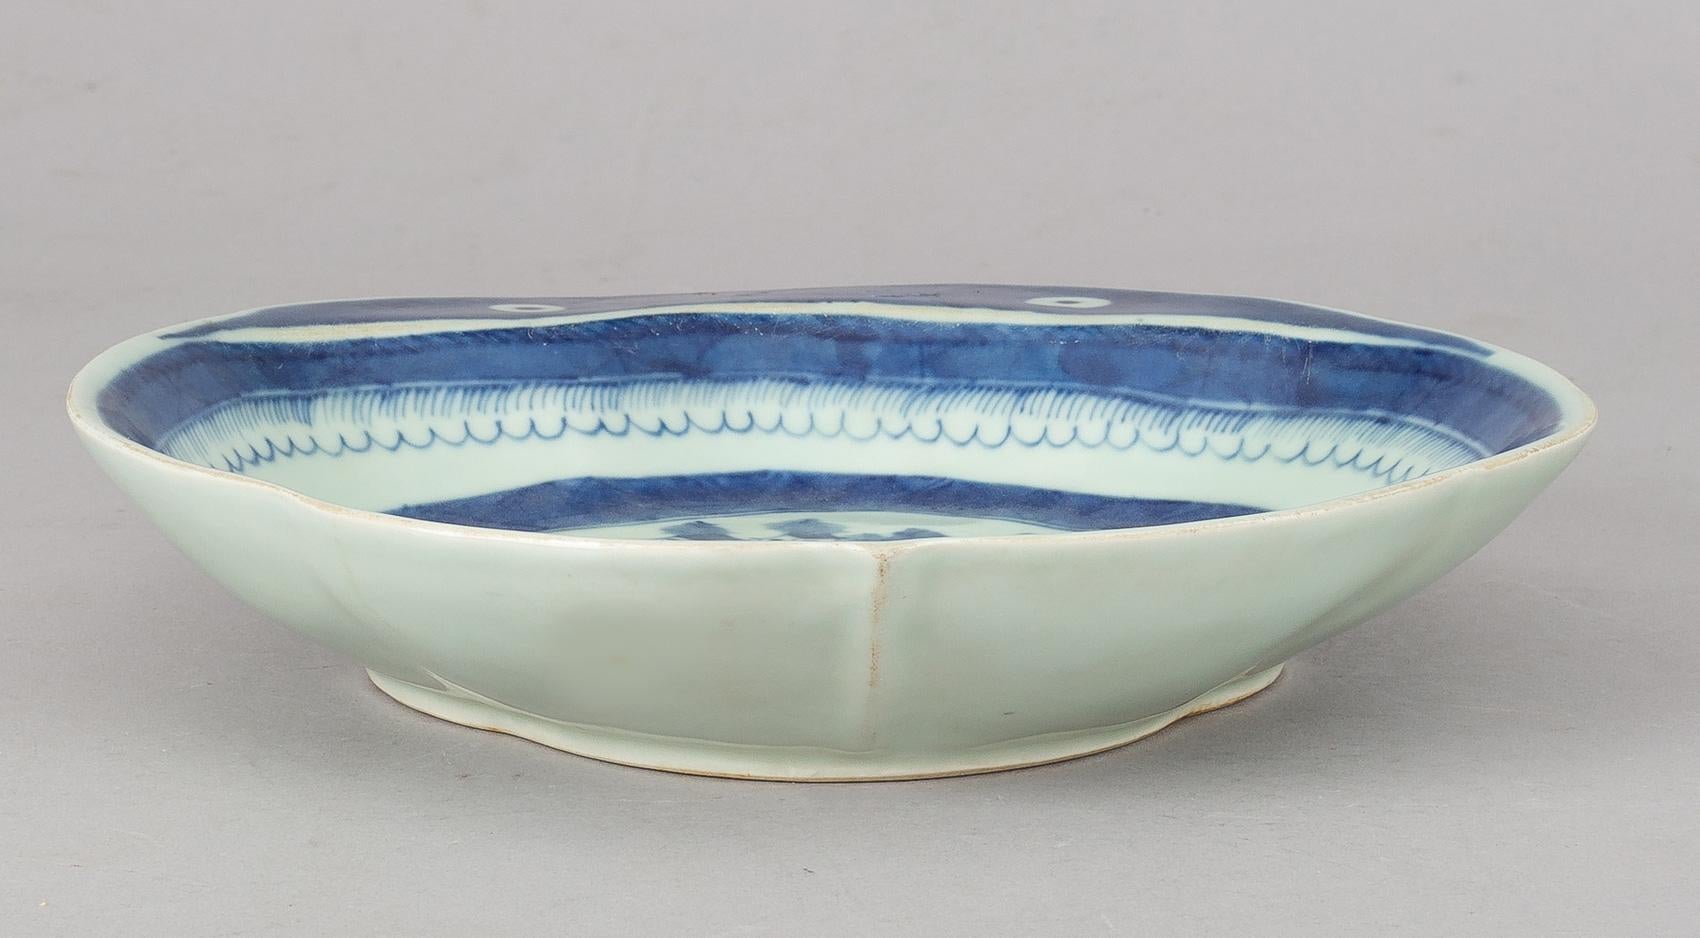 Chinese Export Canton blue and white porcelain lobed shrimp dish, the flange decorated with two eyes, the centre decorated with pagodas, a bridge, boats, trees and rockery.